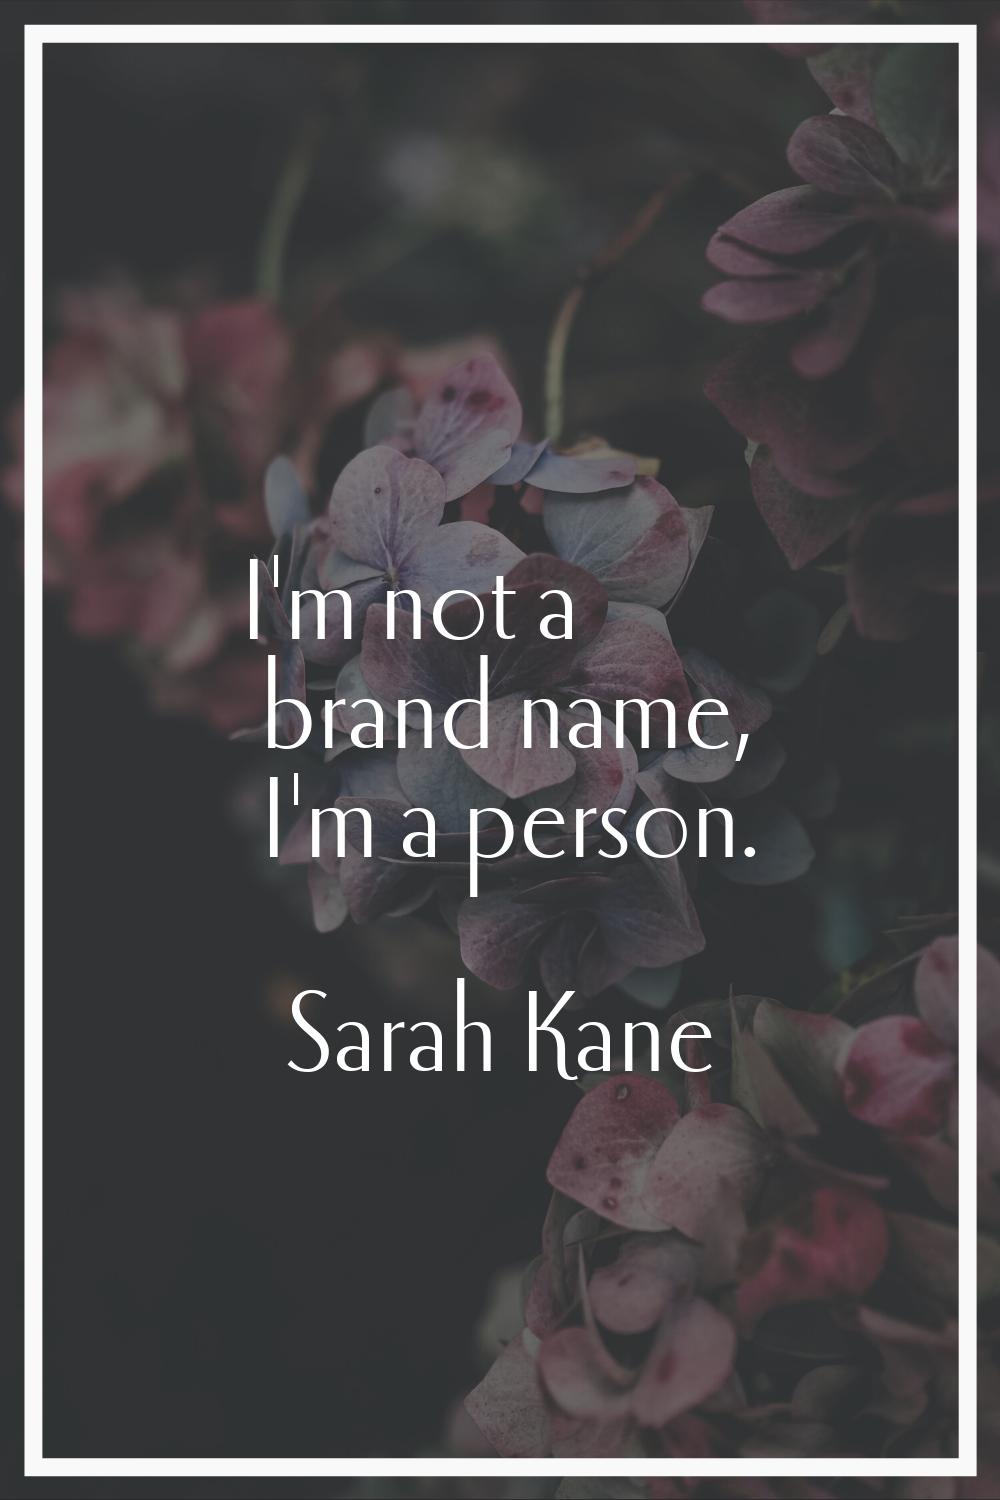 I'm not a brand name, I'm a person.